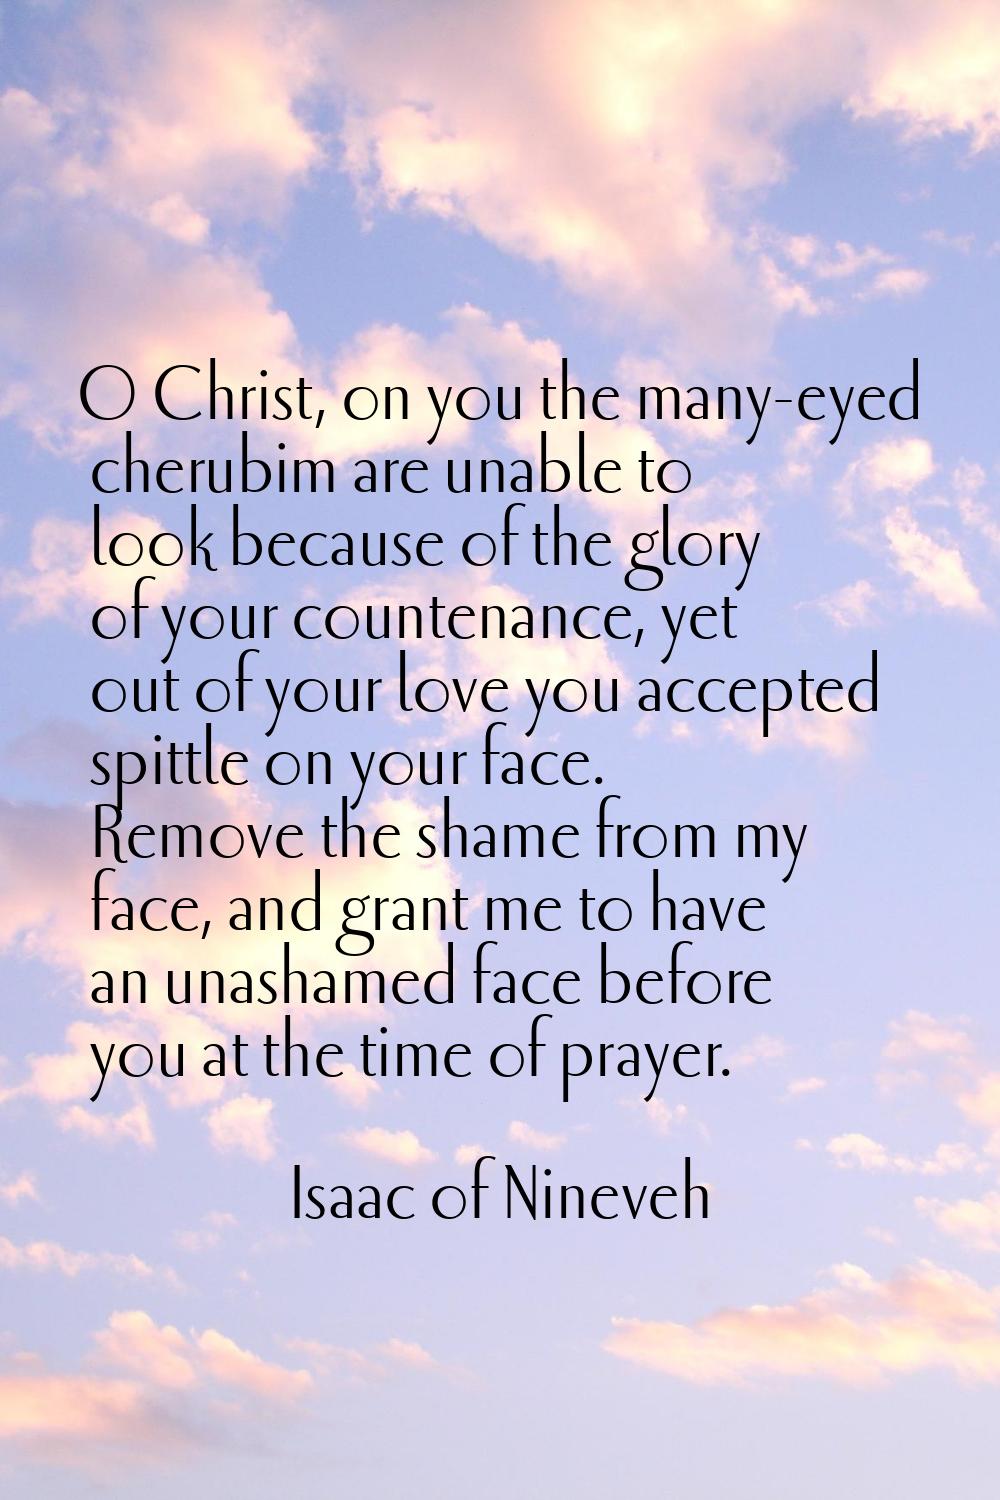 O Christ, on you the many-eyed cherubim are unable to look because of the glory of your countenance